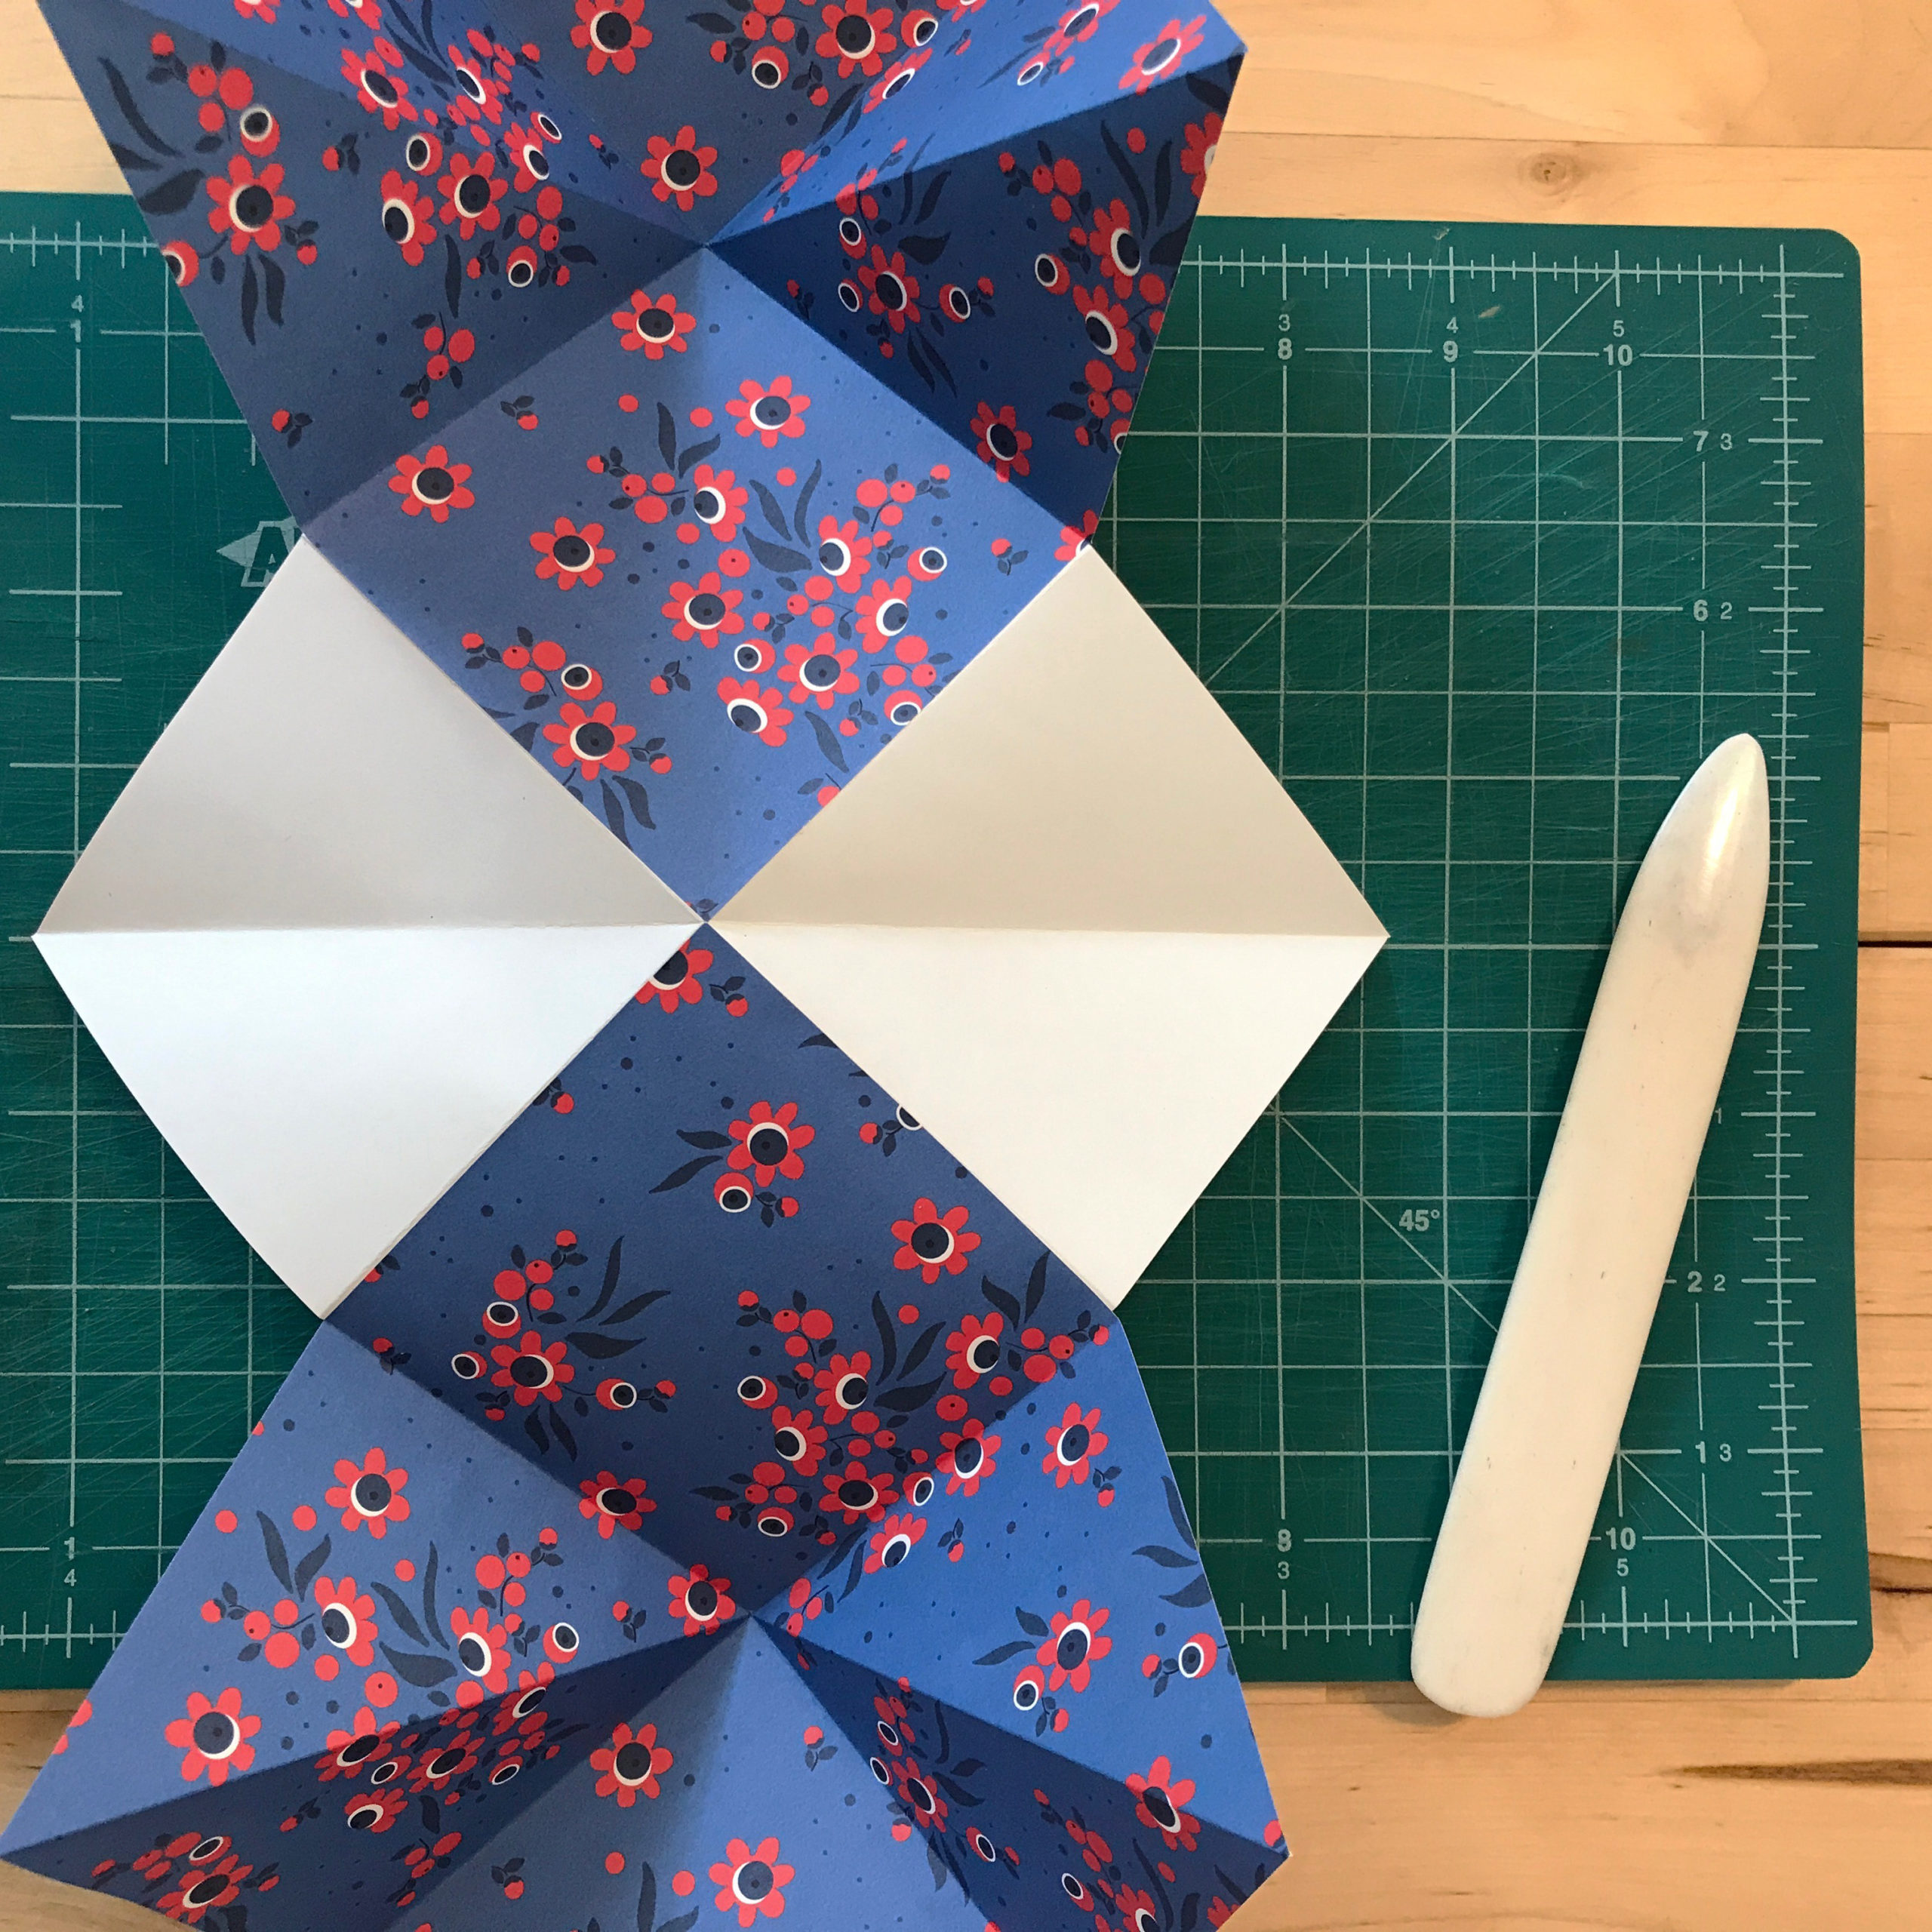 Tutorial] How To Make A Headband in Bookbinding